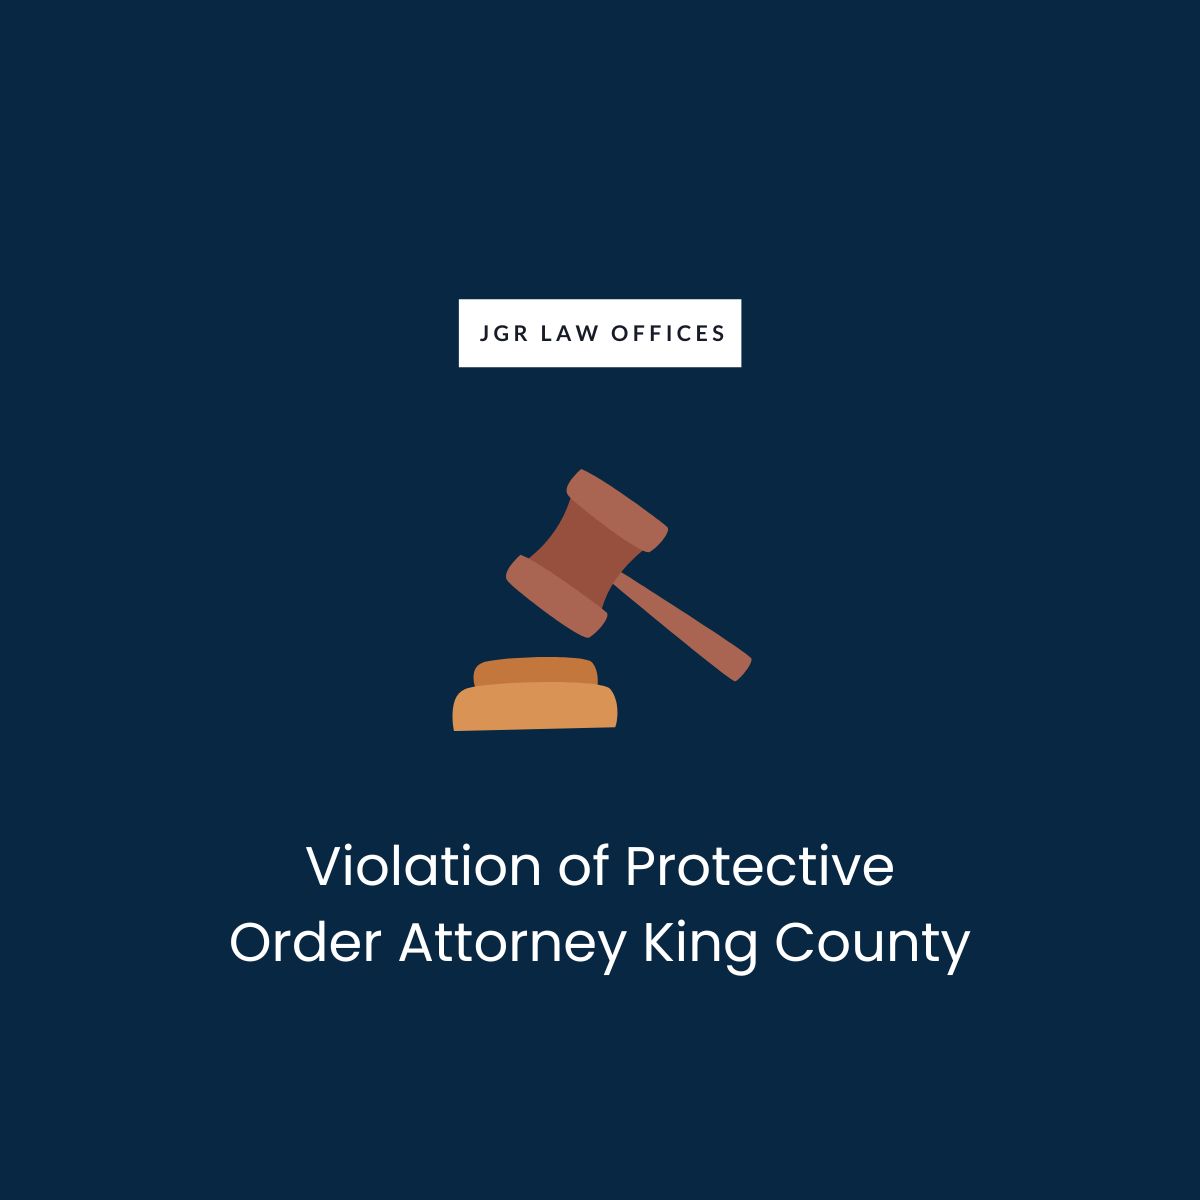 Violation of Protective Order Attorney King County